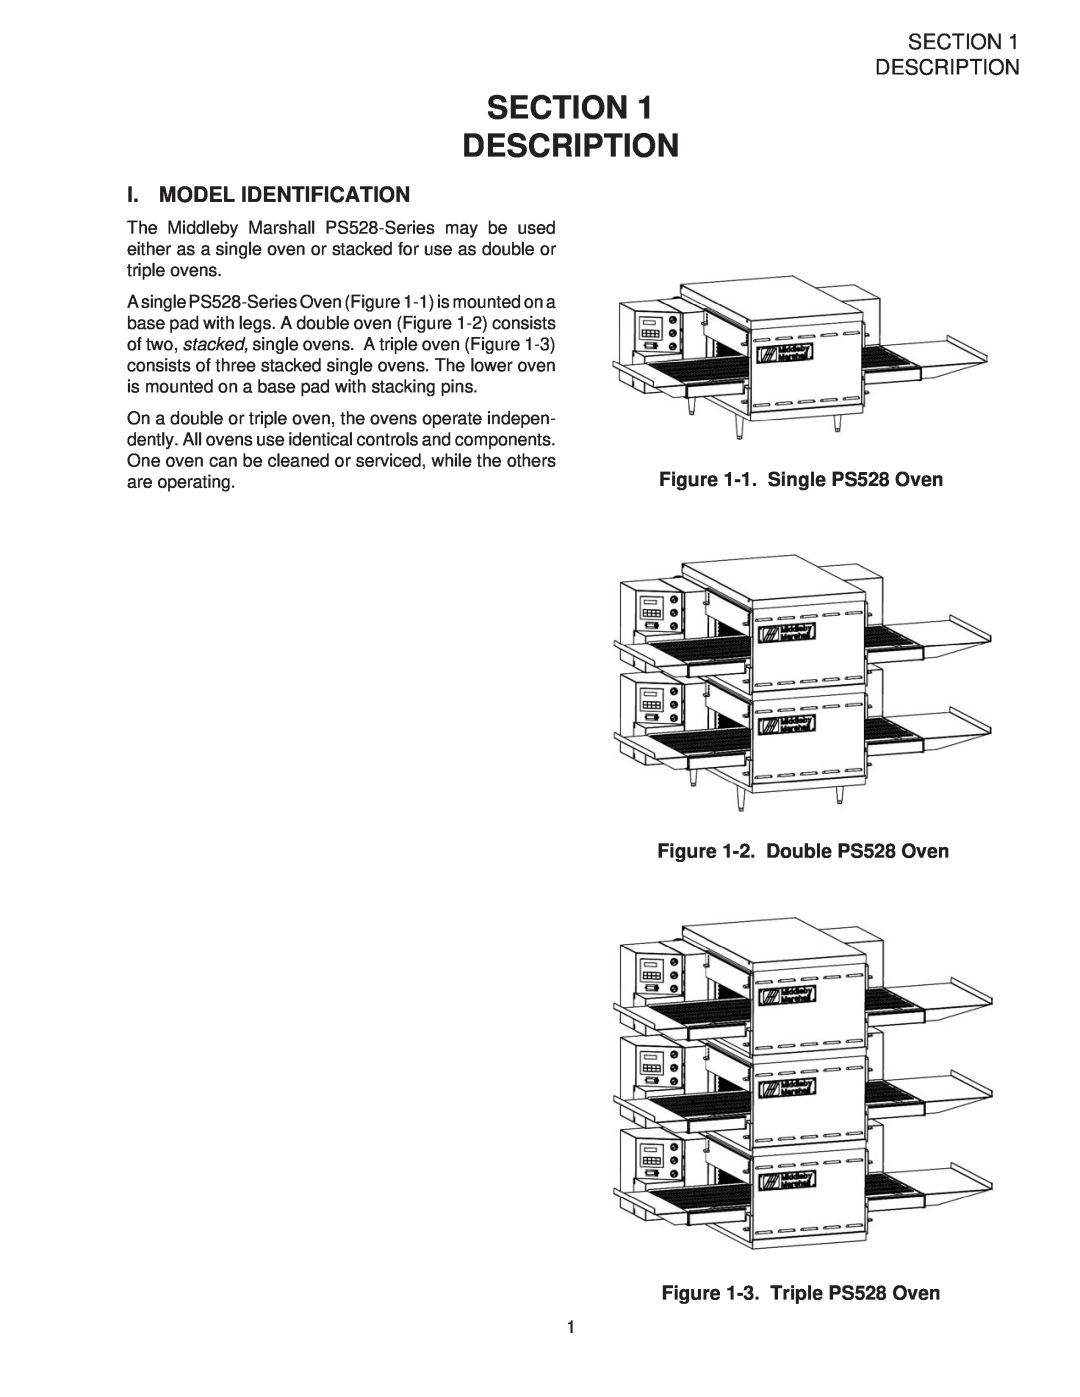 Middleby Marshall PS528G installation manual Section Description, I. Model Identification, 1. Single PS528 Oven 